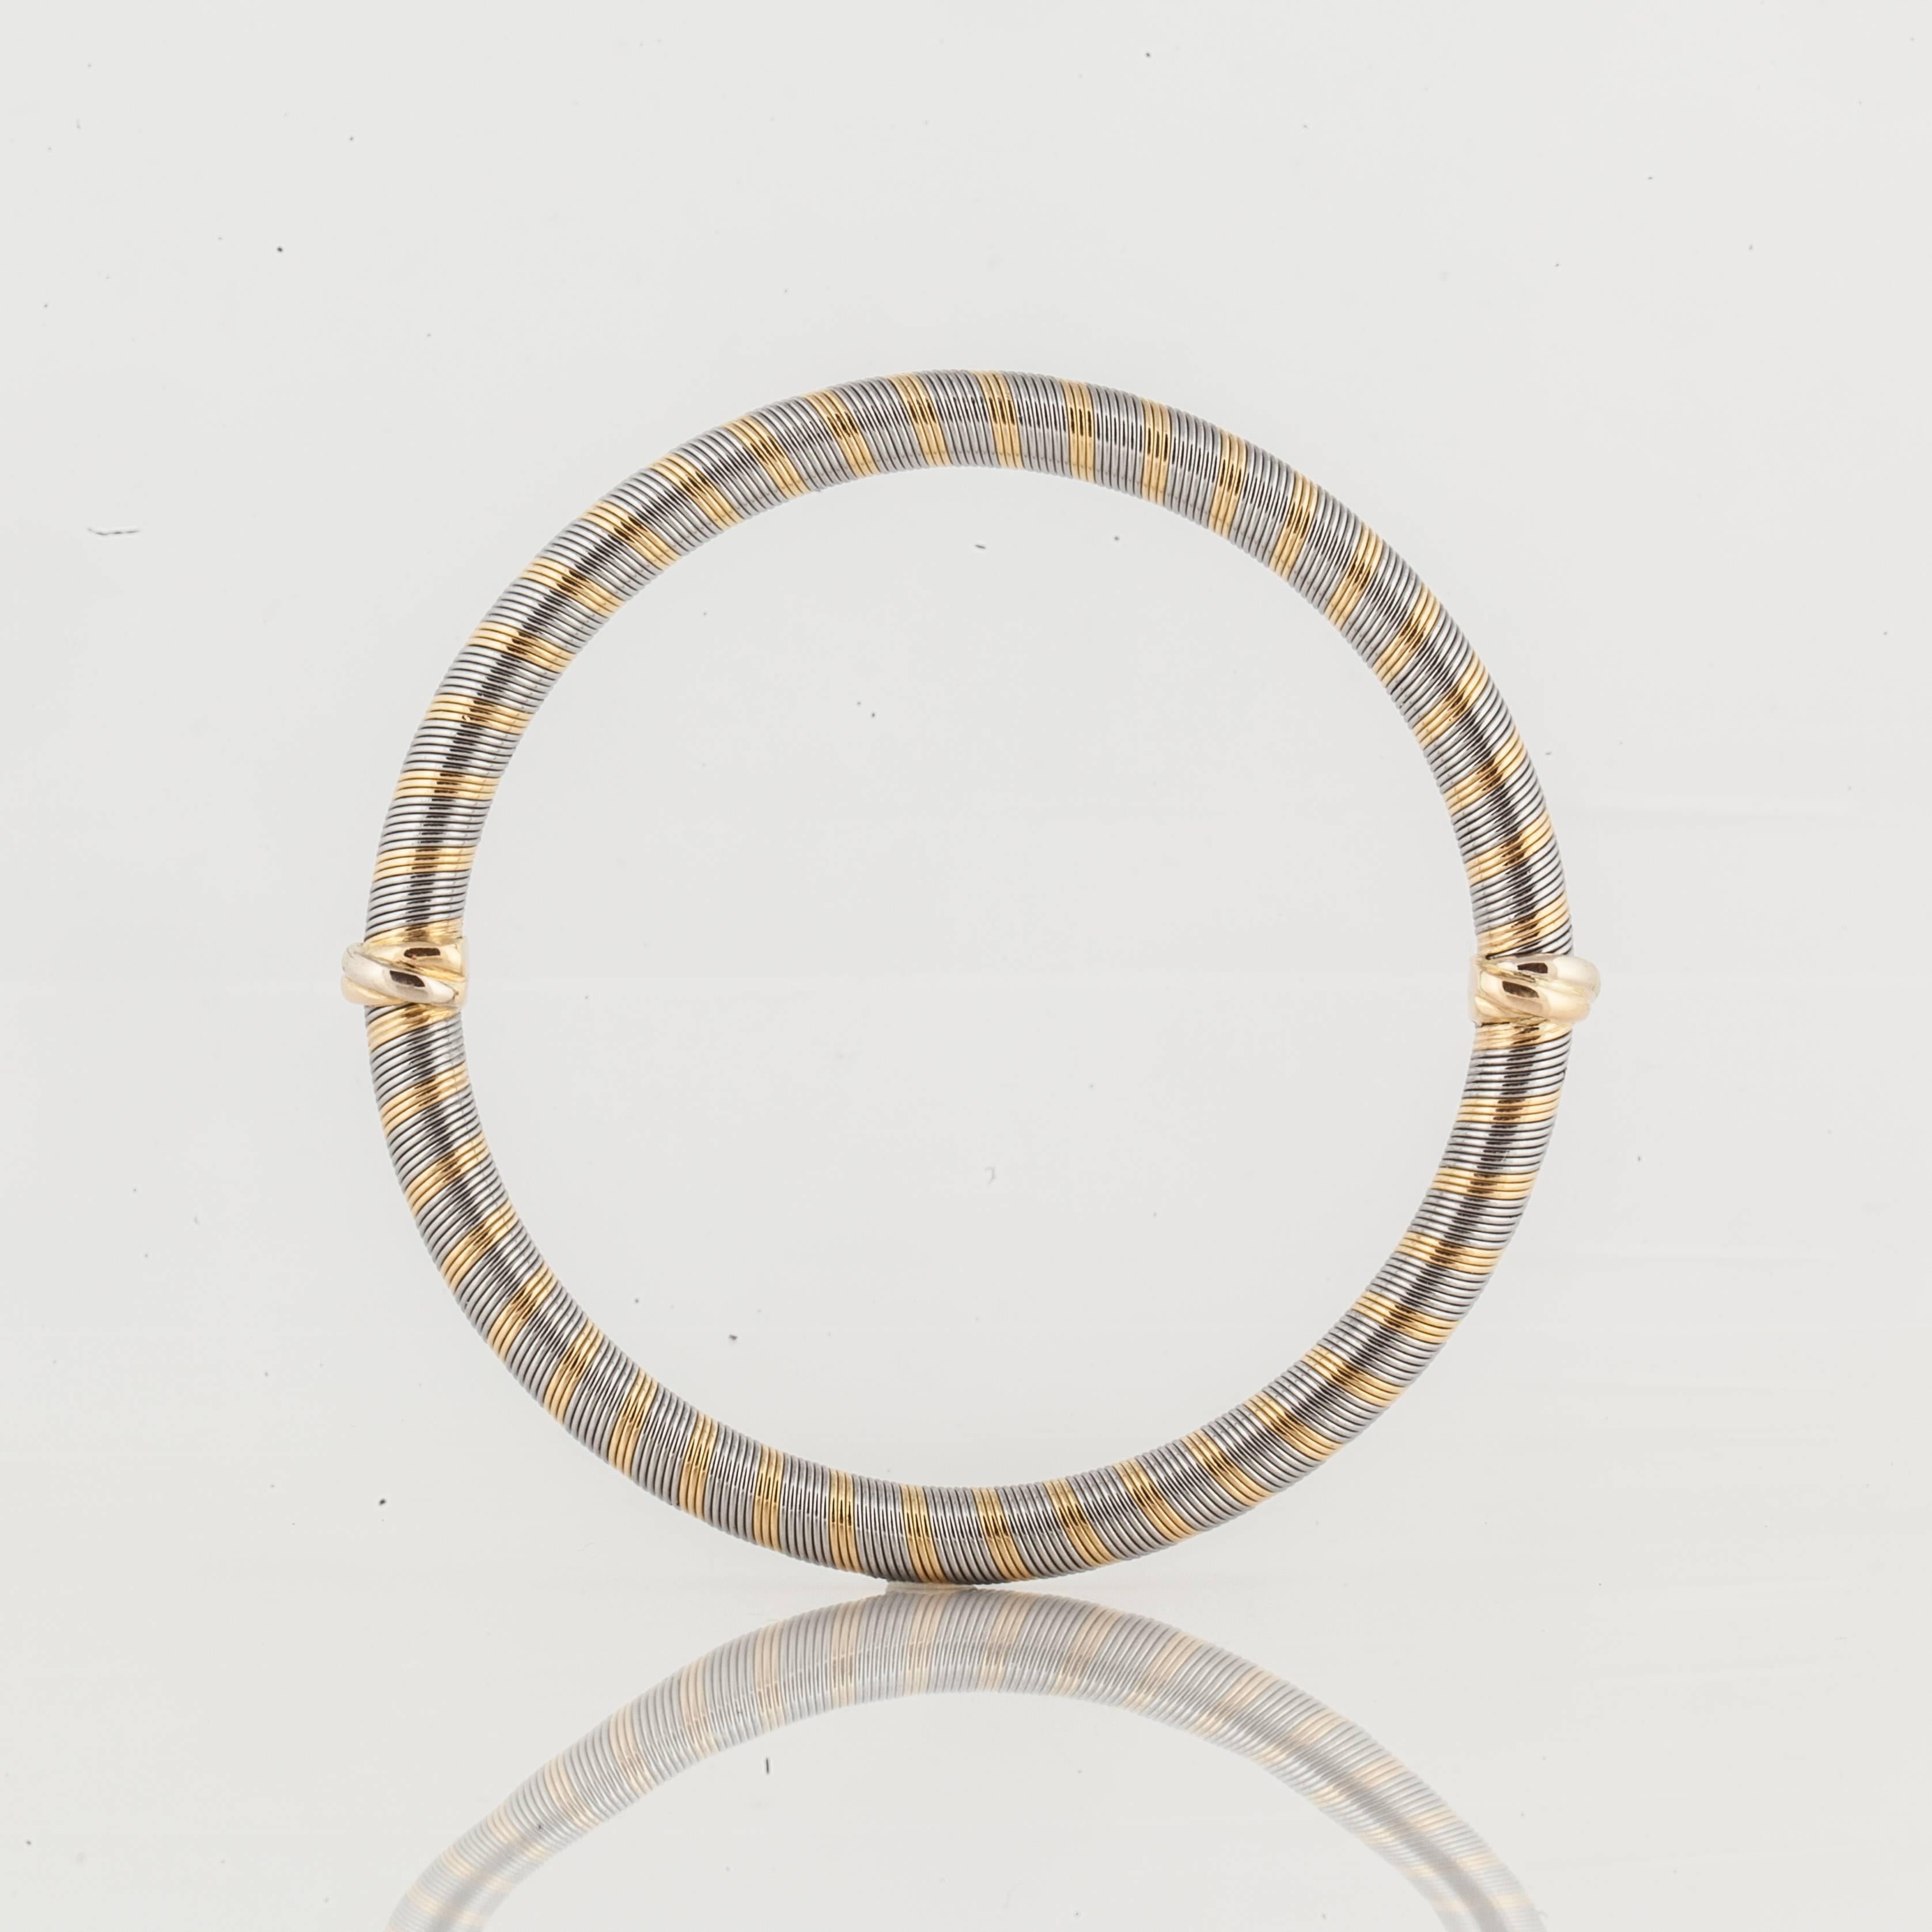 Cartier bangle bracelet in 18K white and yellow gold.  This bracelet is marked 